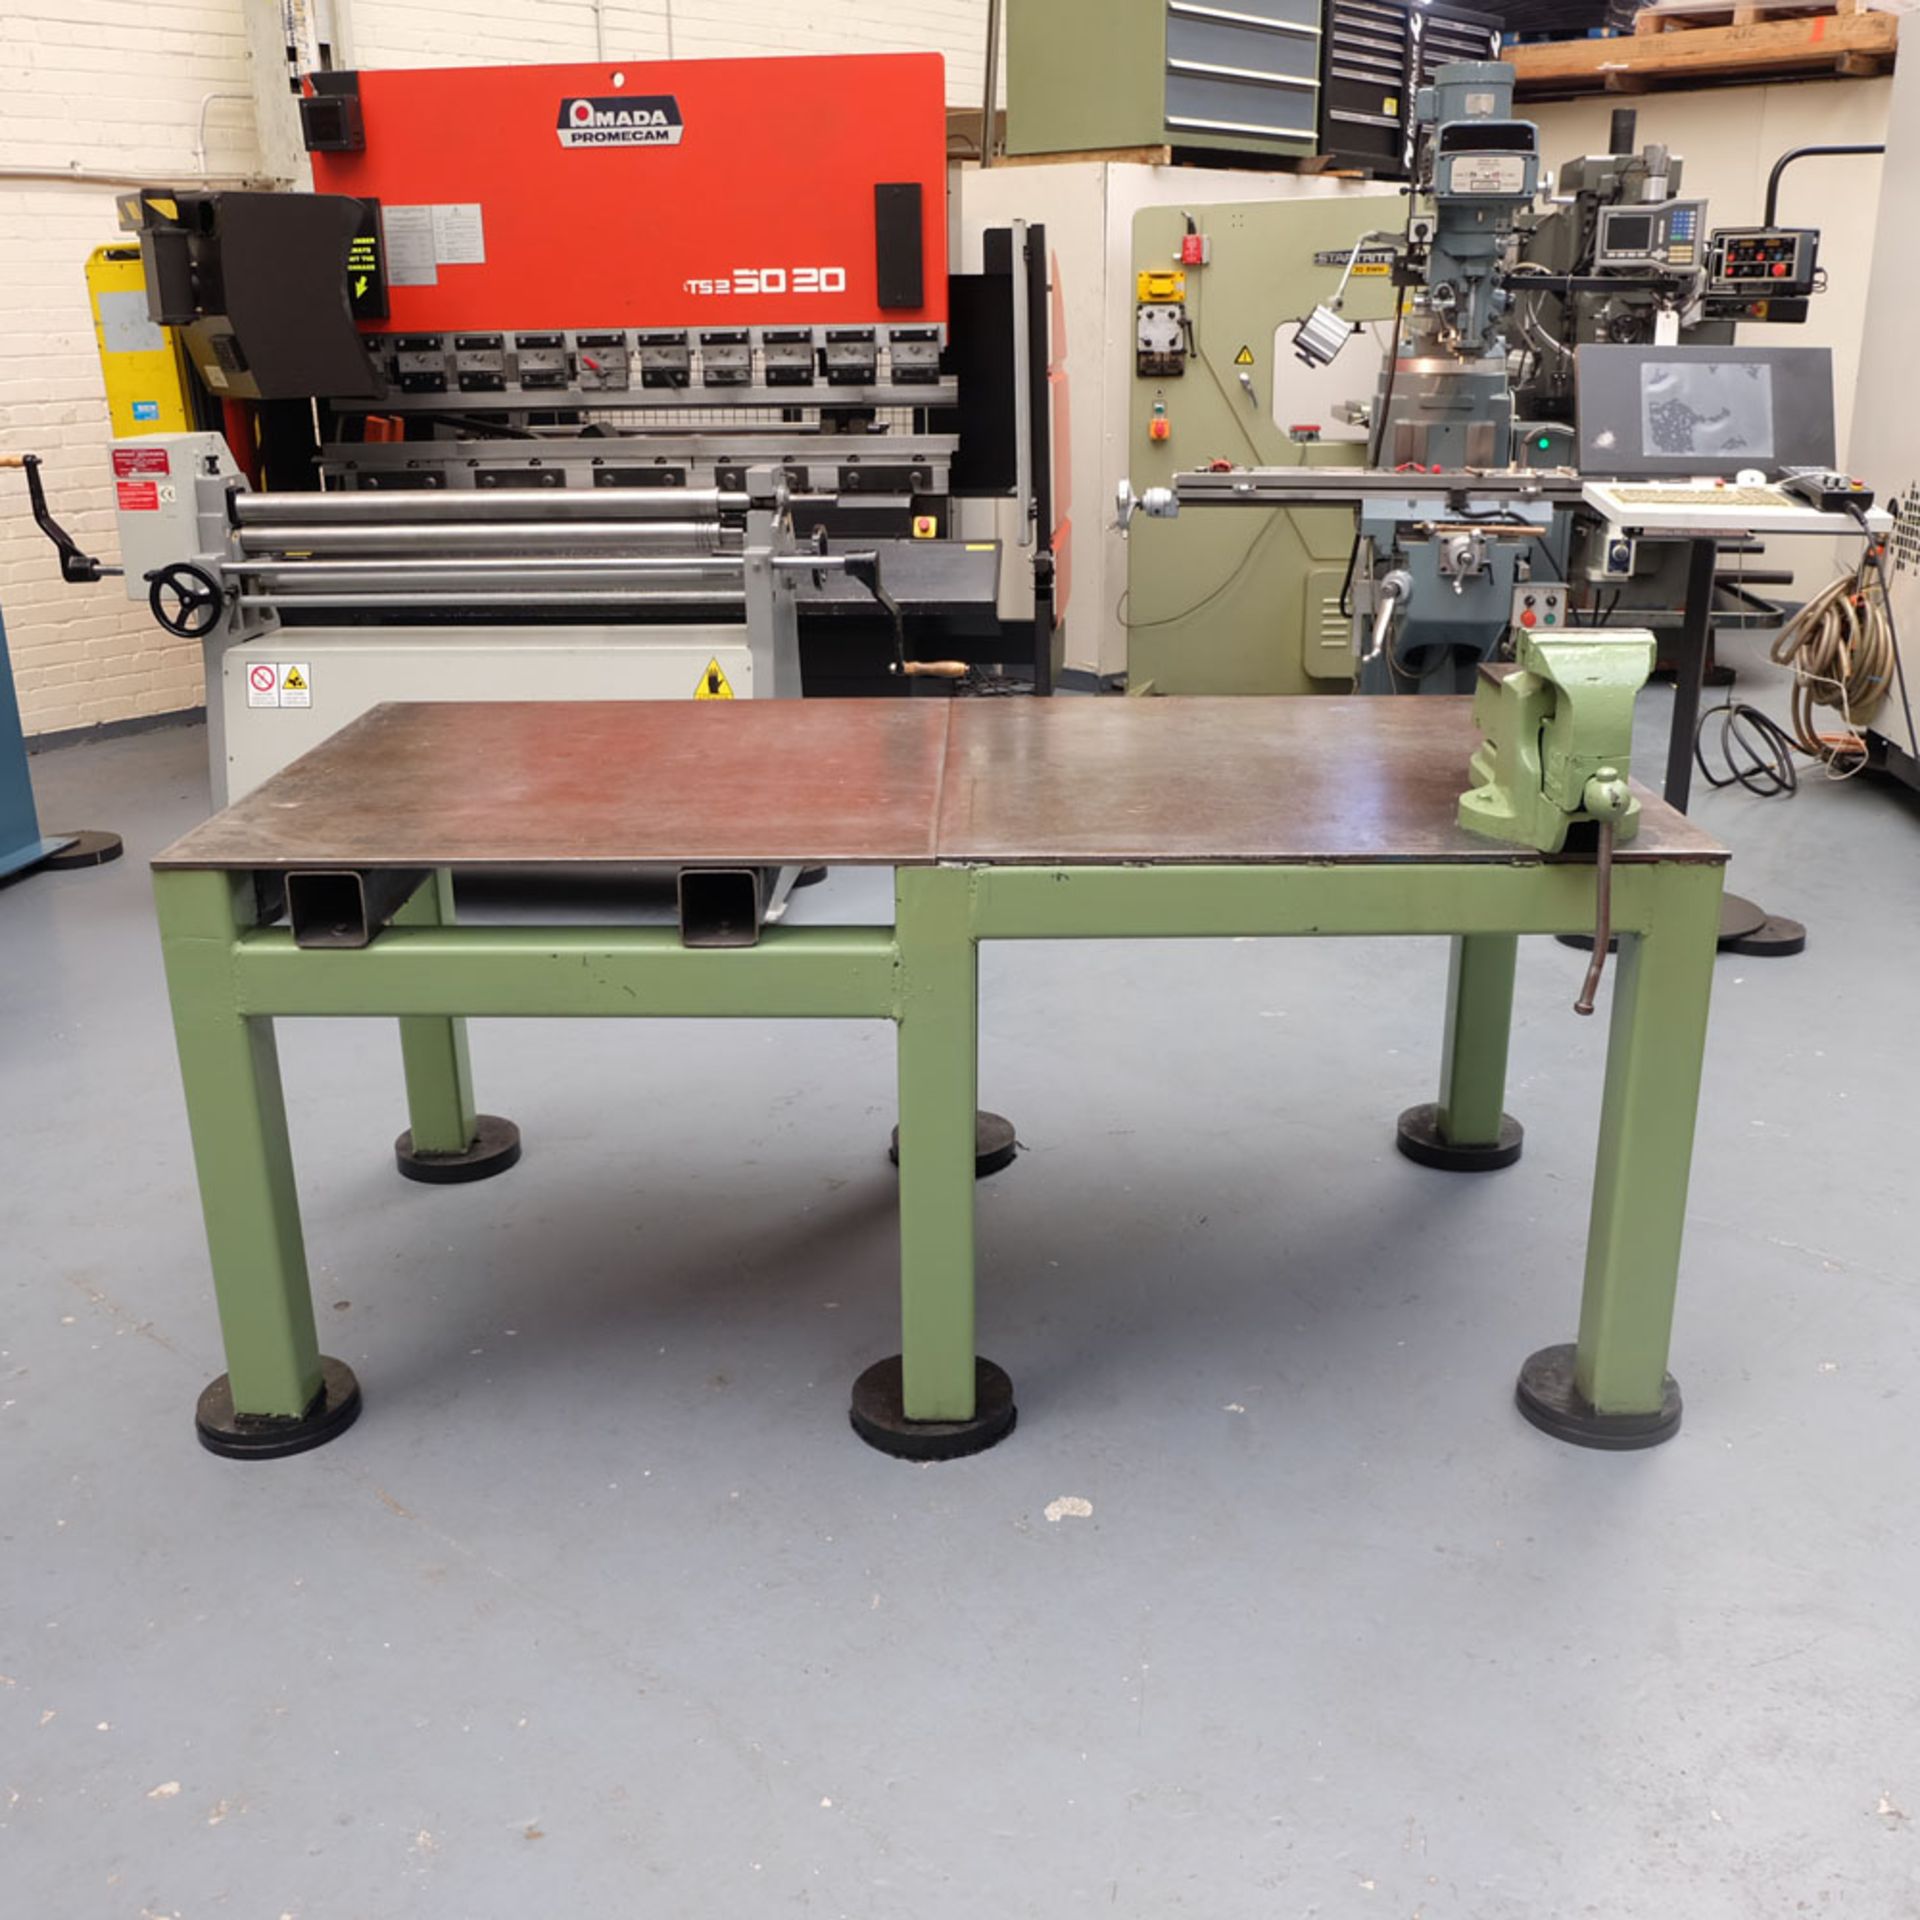 HeavyDuty Steel Work Bench With Record No.25 Bench Vice.Work Bench Size 2000mm x 1000mm x 830mm High